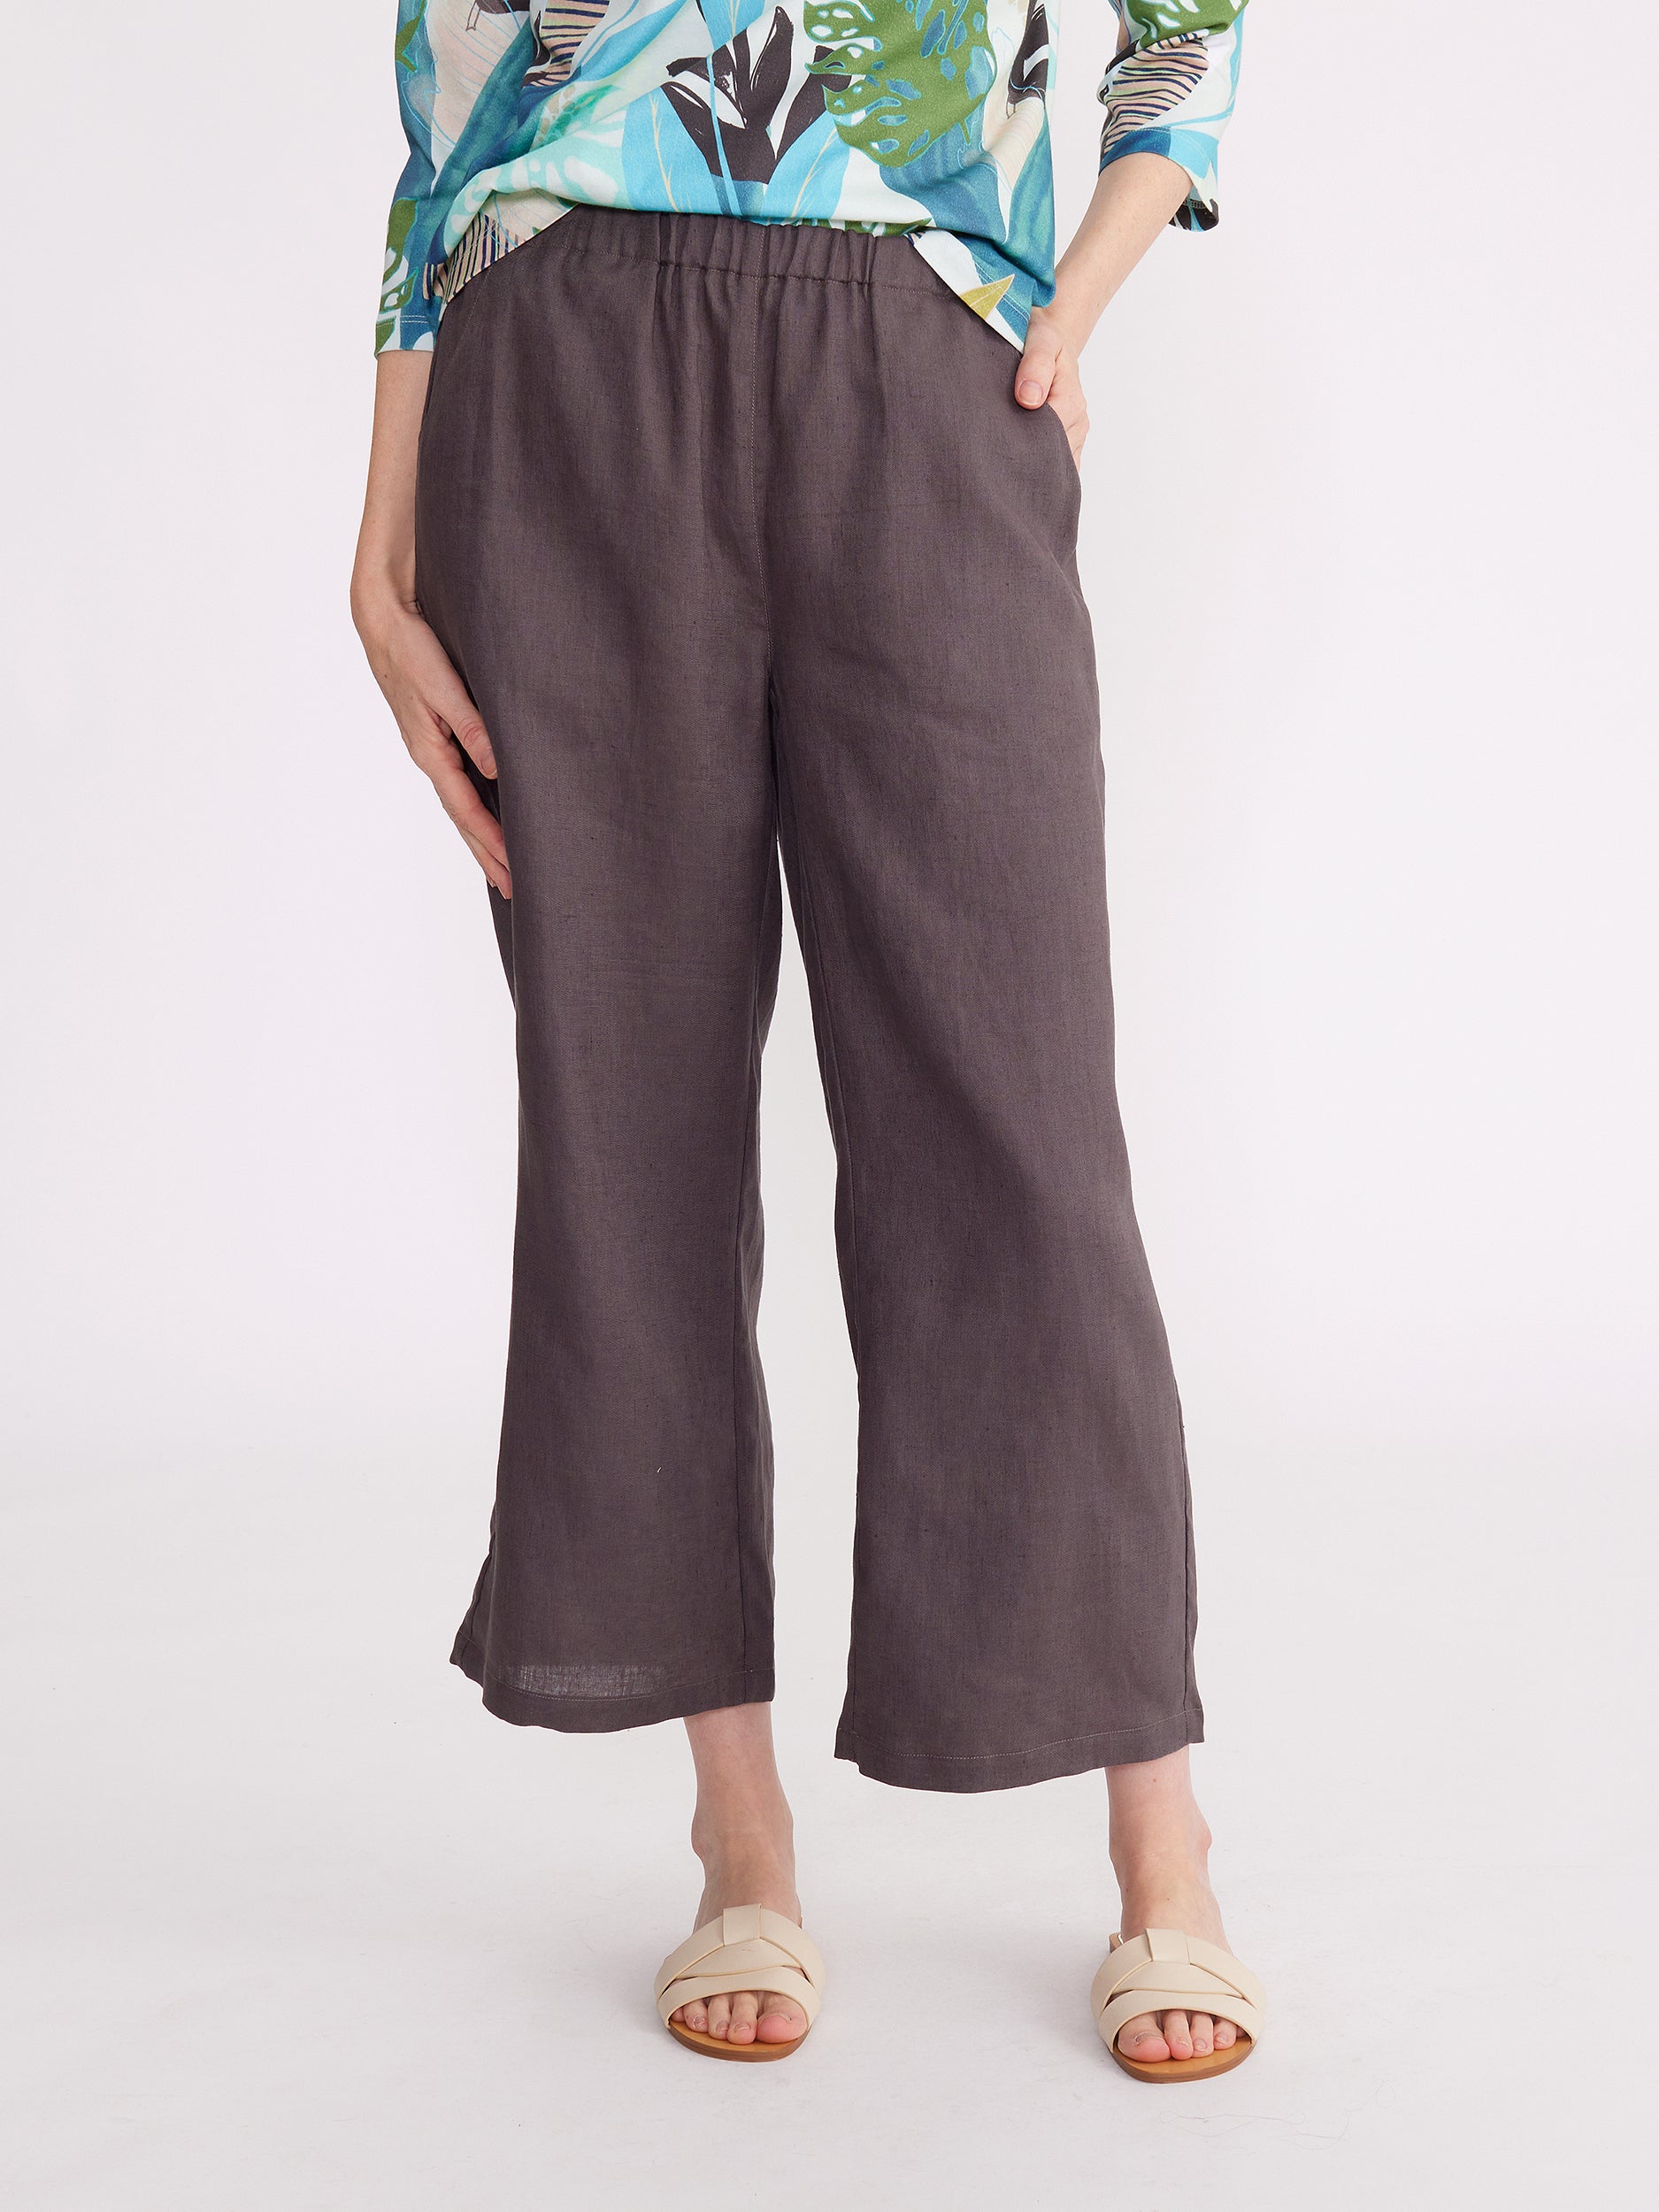 Essential Linen Pant – Yarra Trail & Marco Polo